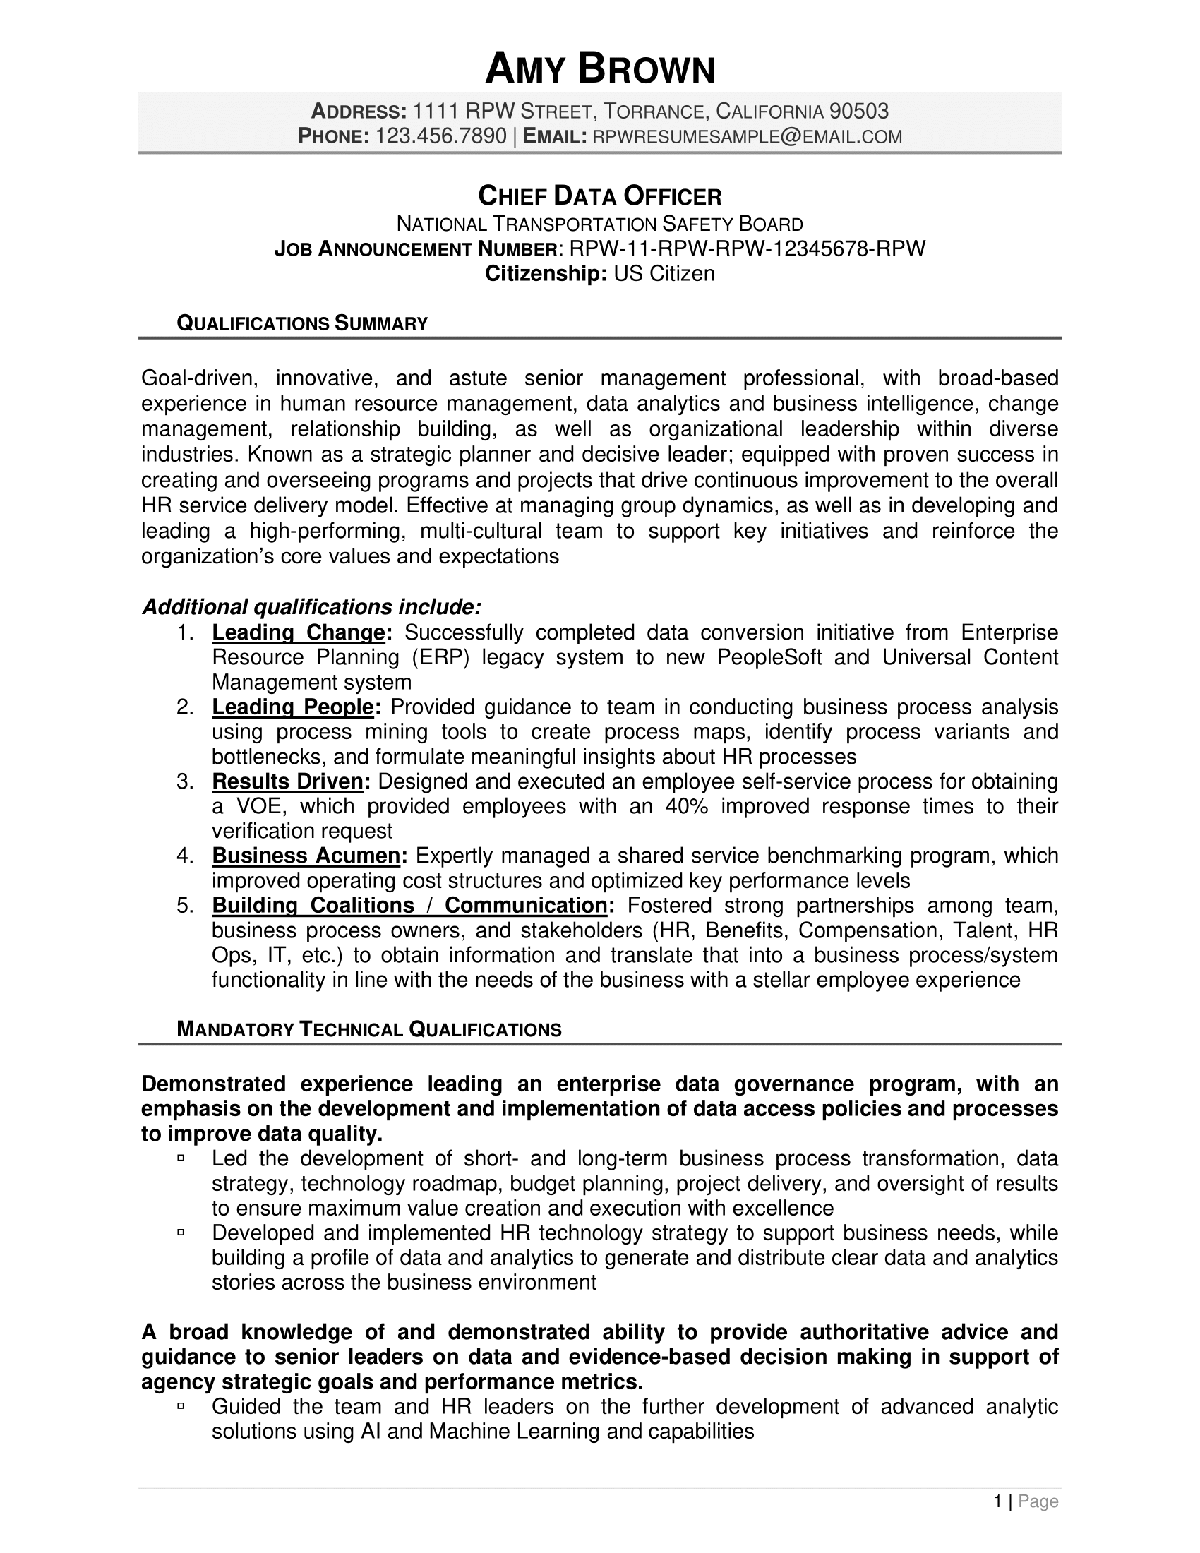 Chief Data Officer Federal Resume Example Page 1